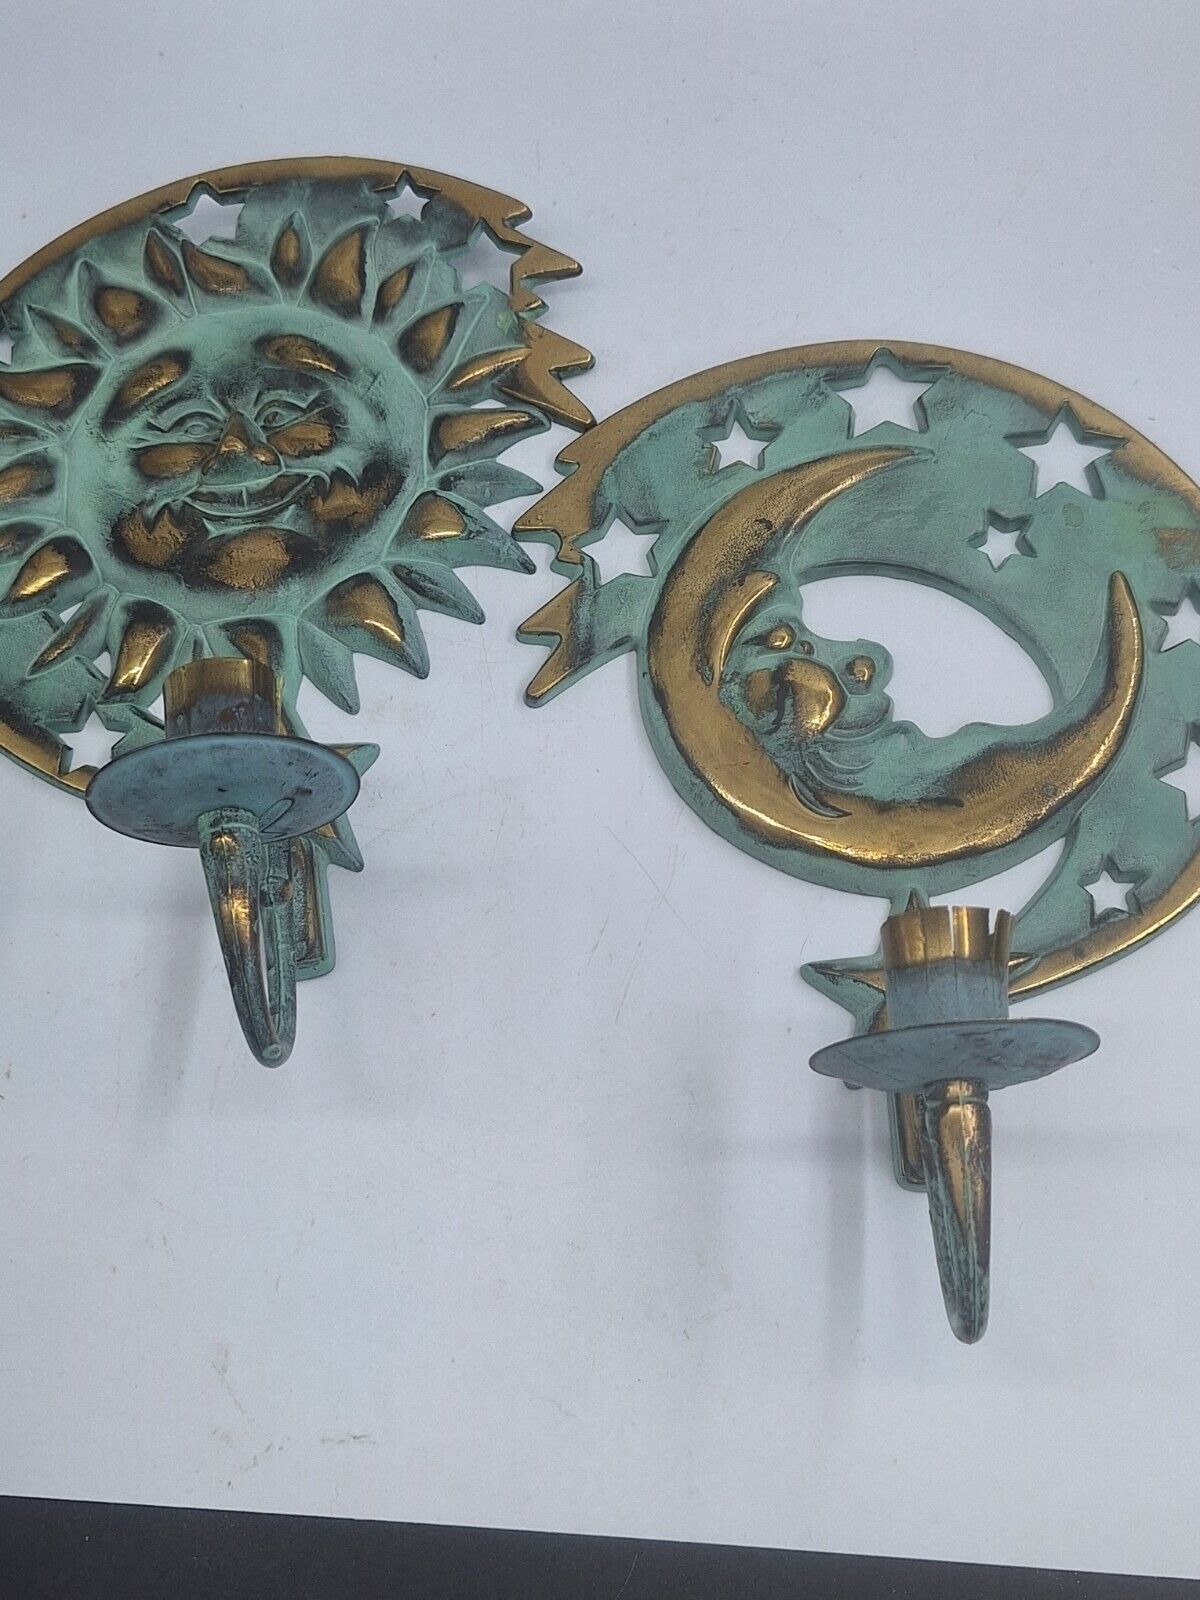 Sun & Moon Celestial Wall Sconce Candle Holder Set Rustic Green 1994 PartyLite